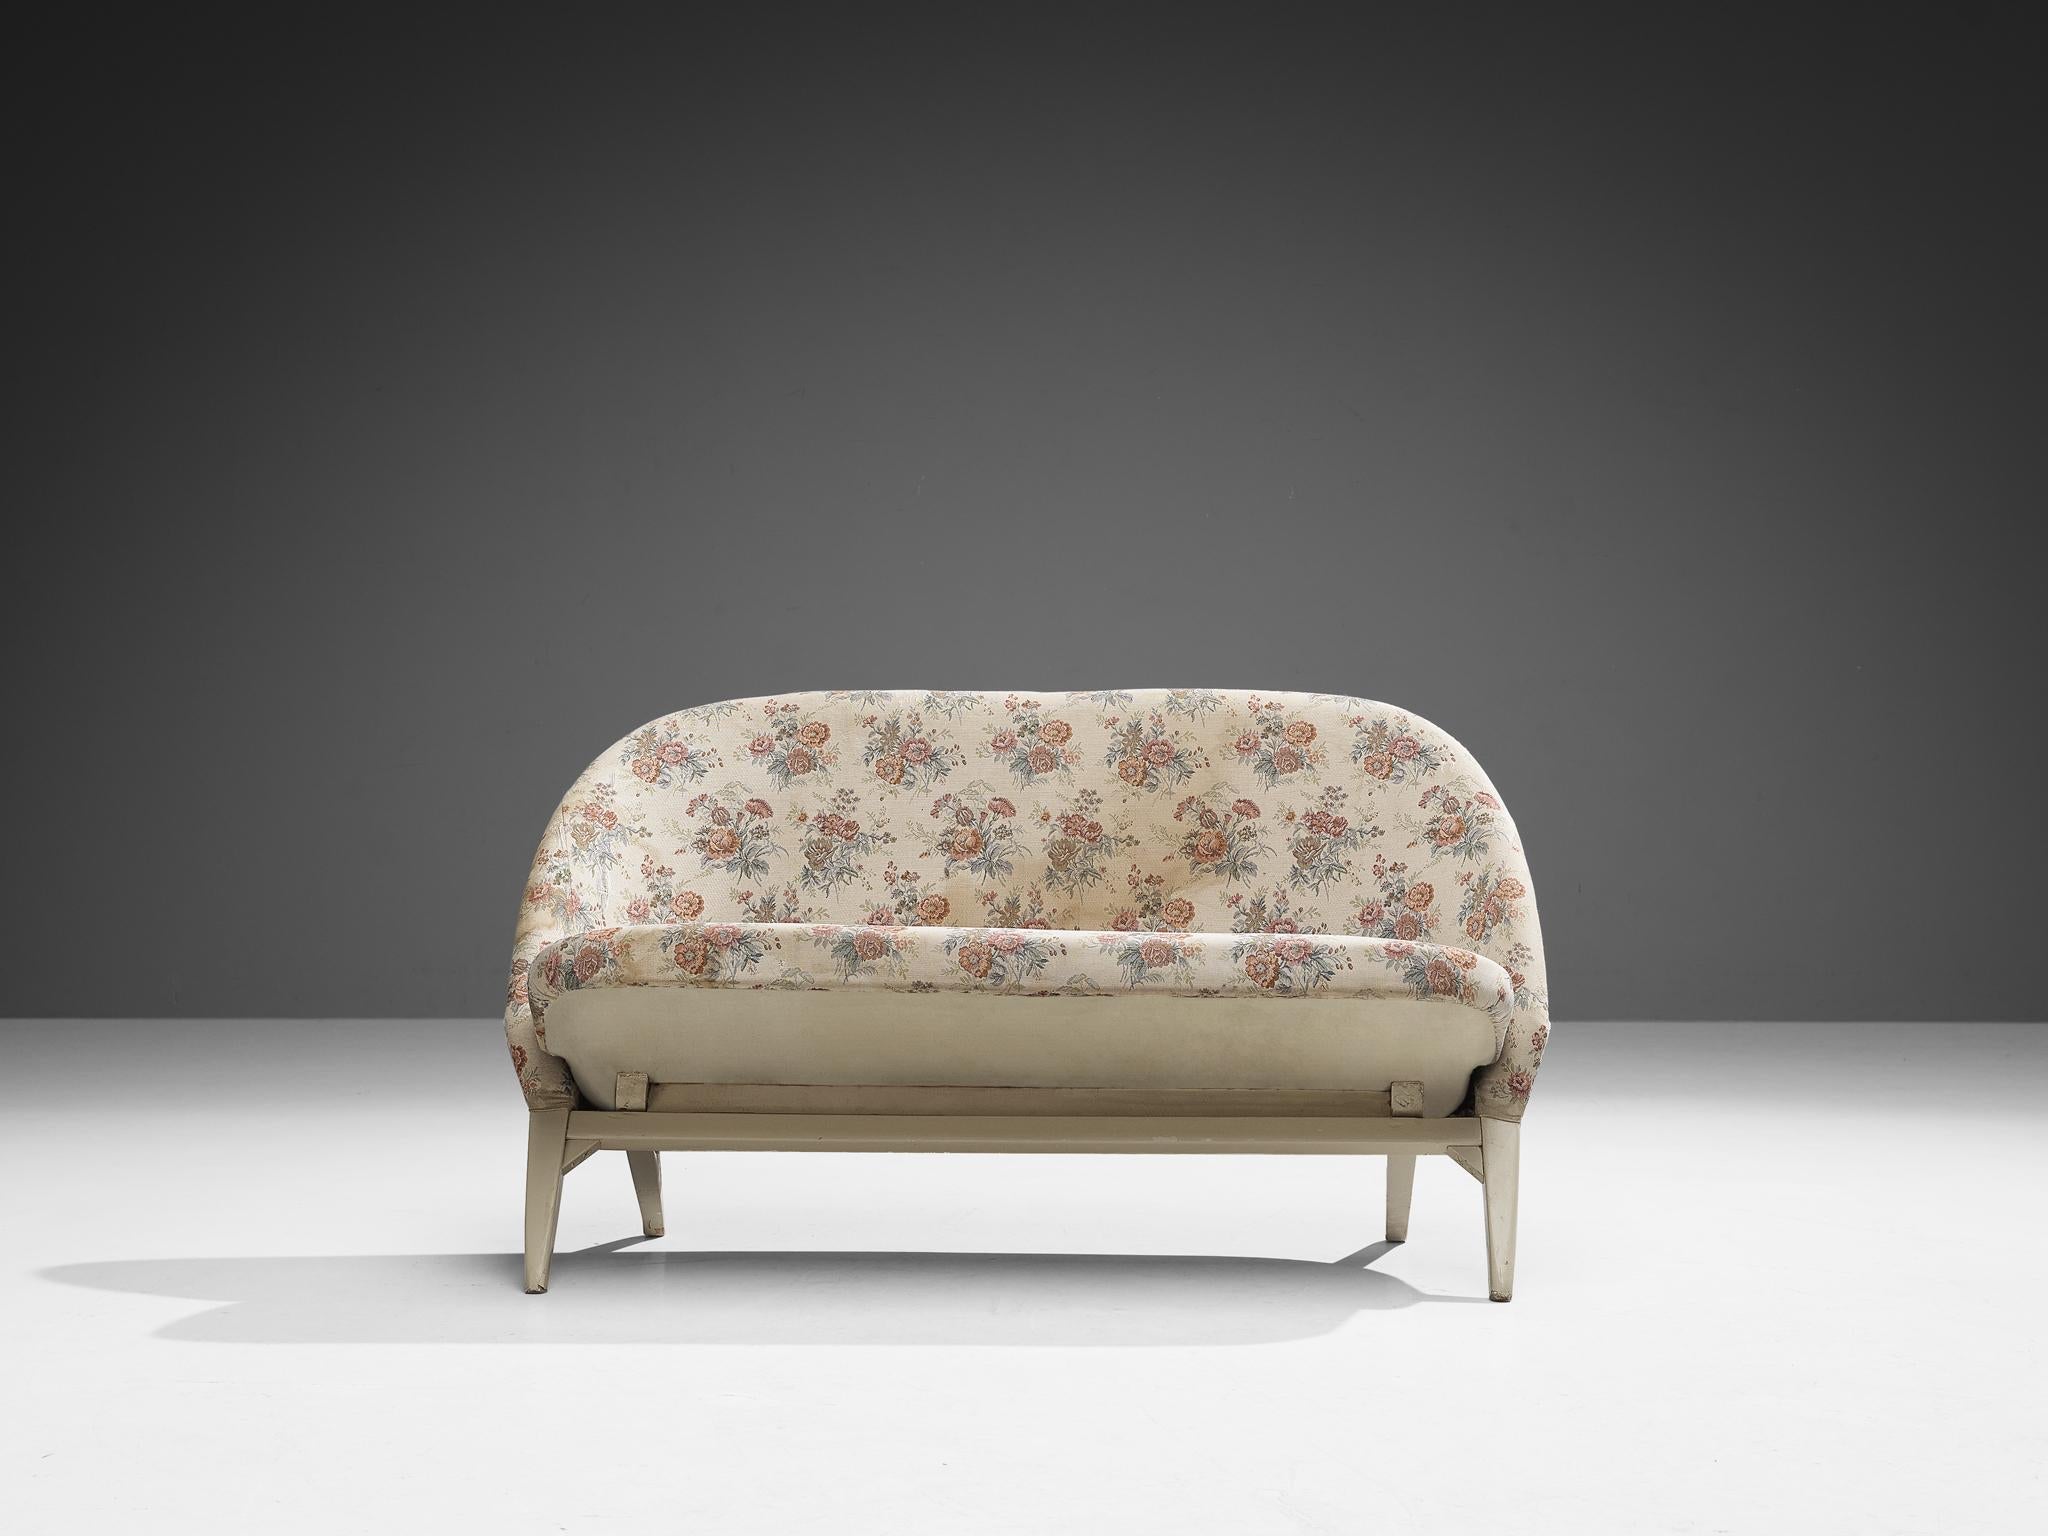 Theo Ruth for Artifort Congo Sofa in Floral Upholstery